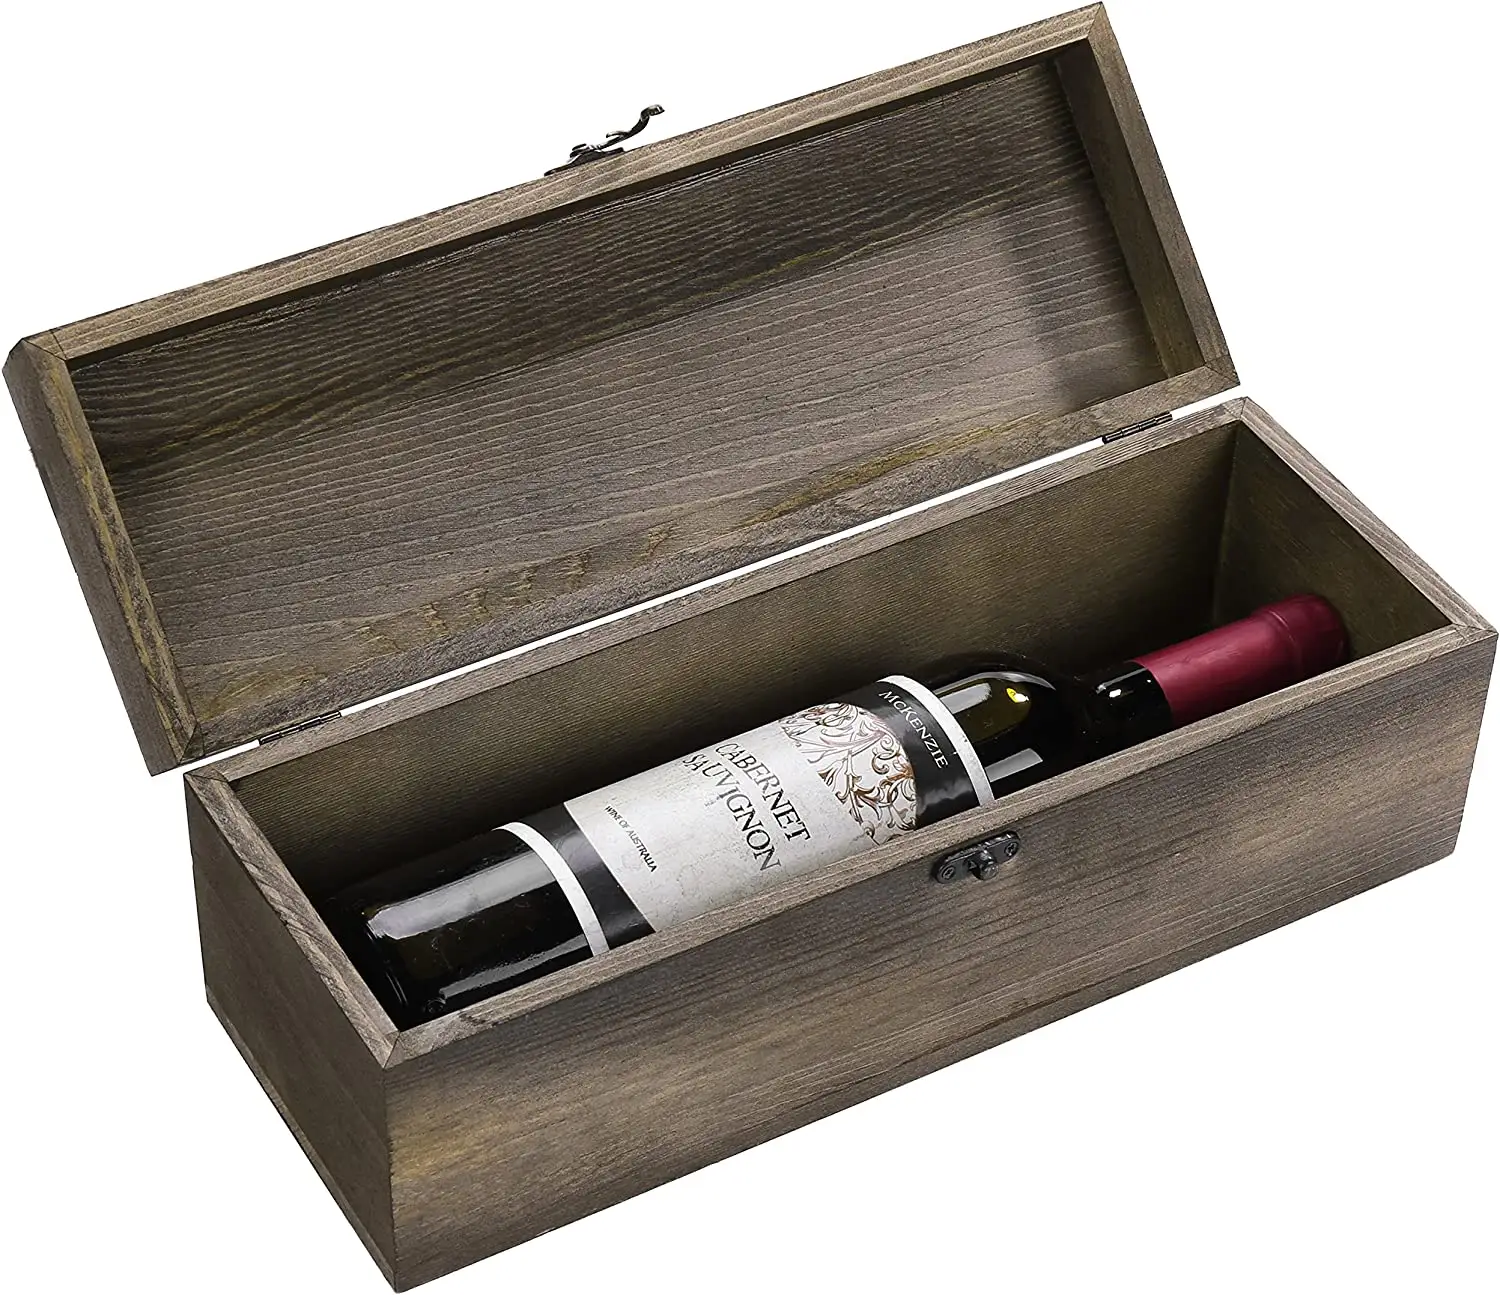 paint lacquer Wood red Wine Bottle Gift Box single wooden wine bottle case with Latched Lid and chalkboard label